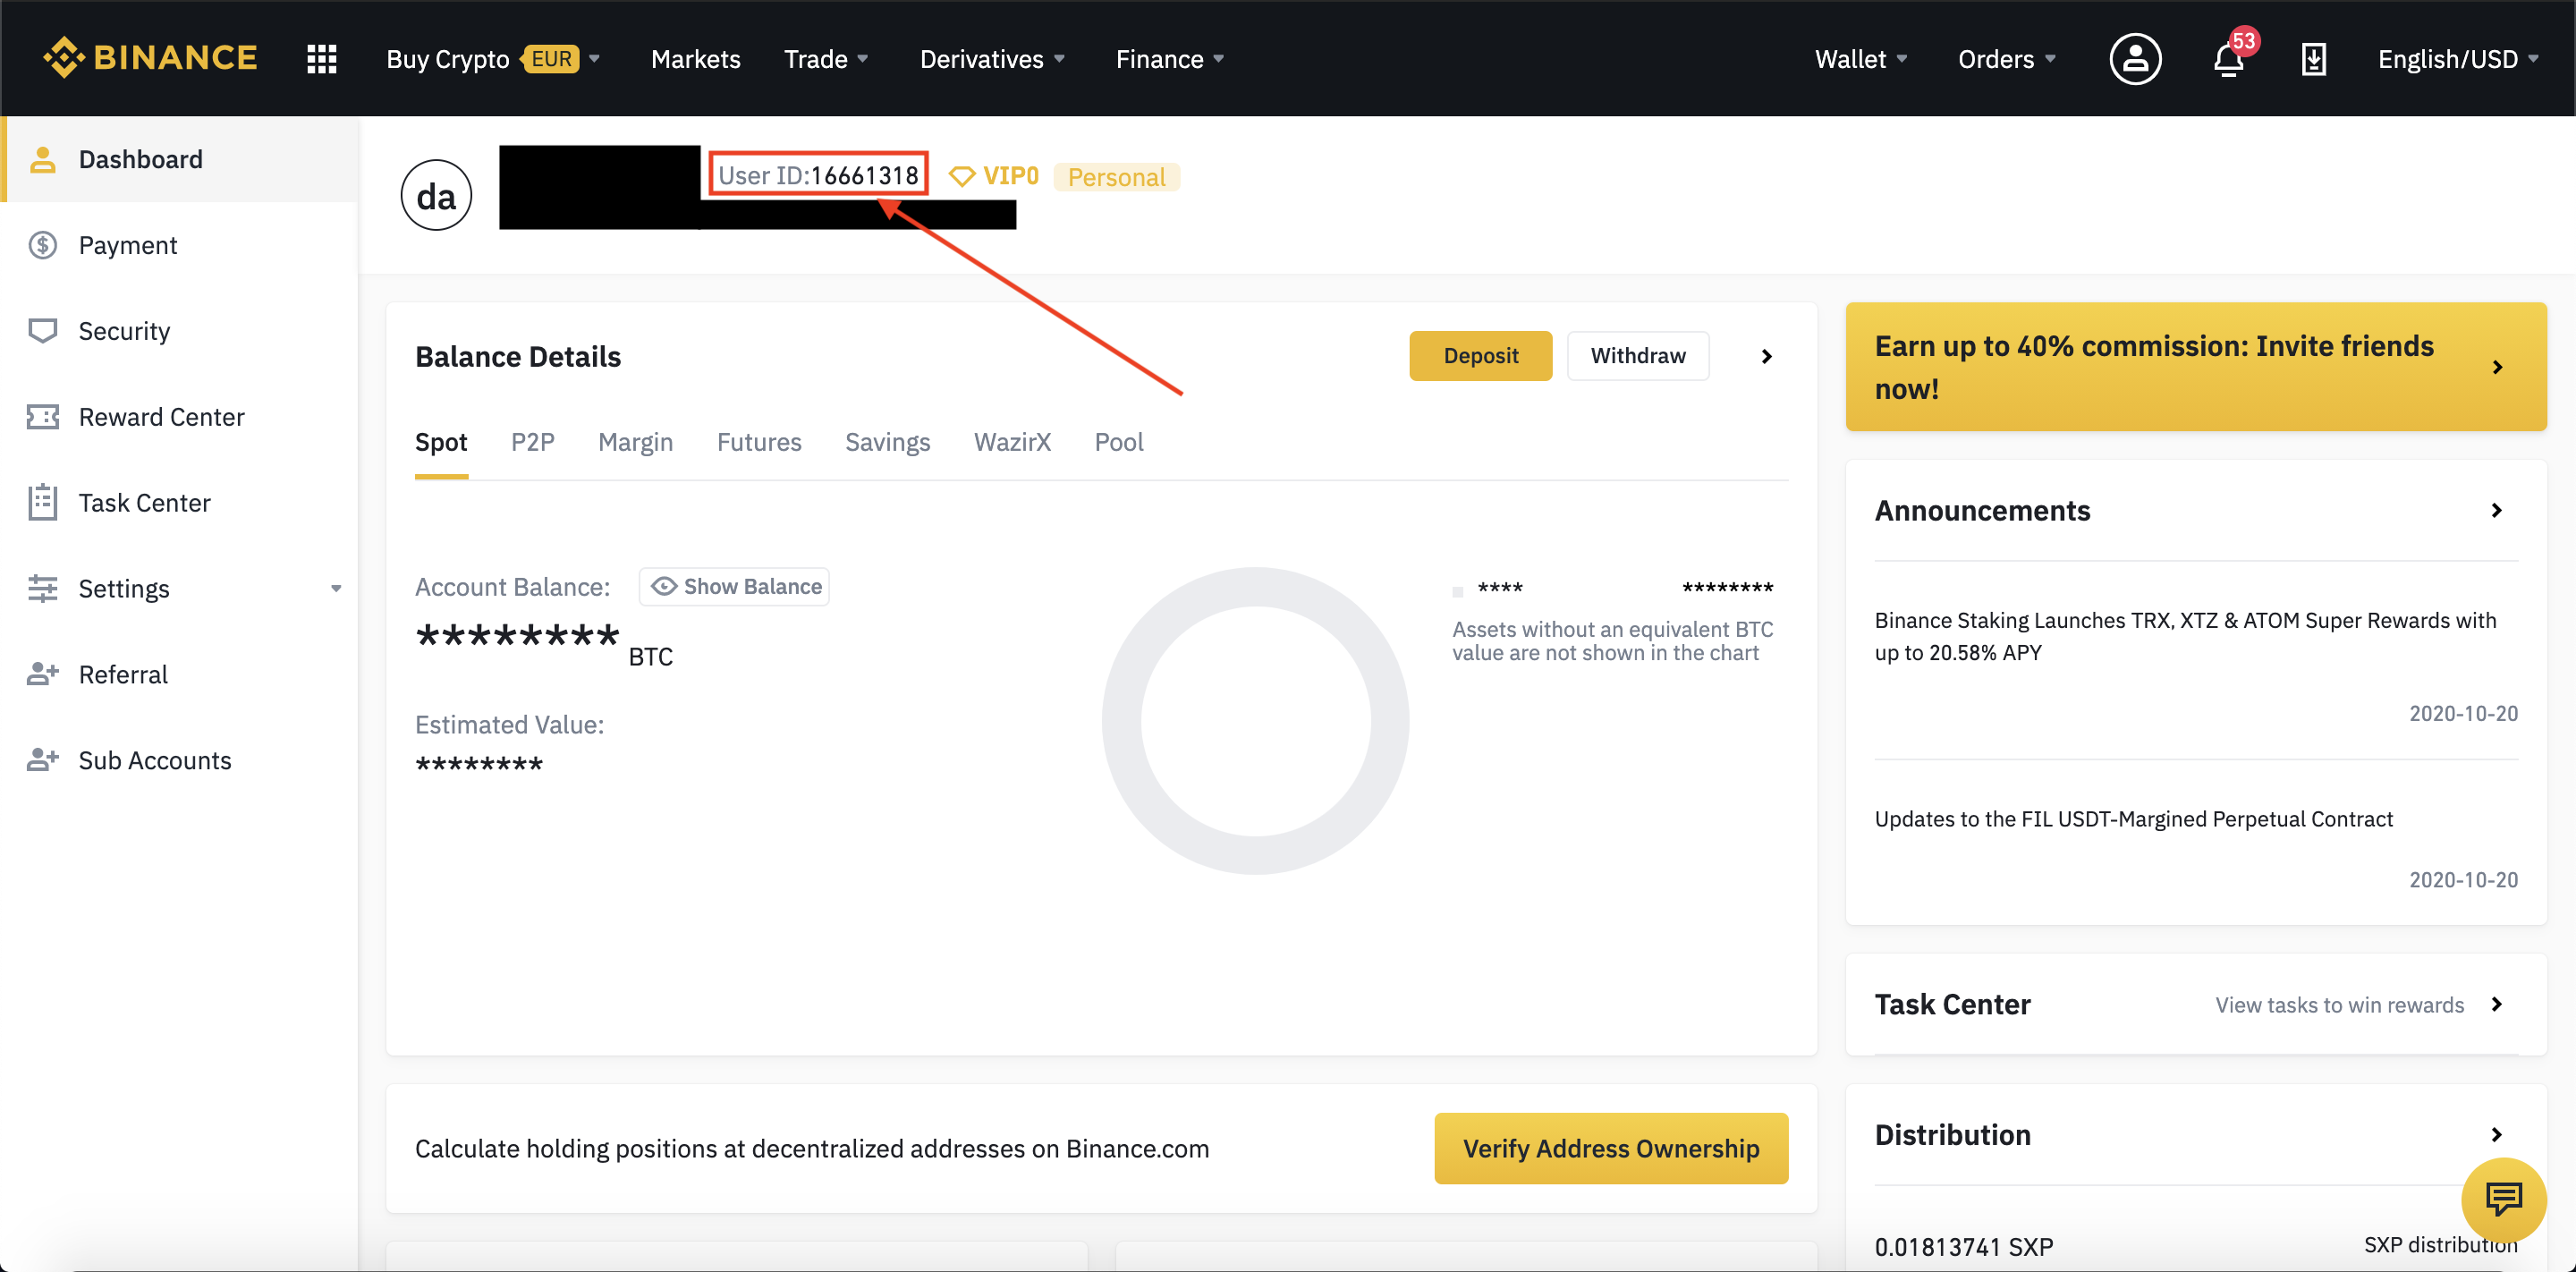 How To Find Your Binance Wallet Address: Step-By-Step Guide